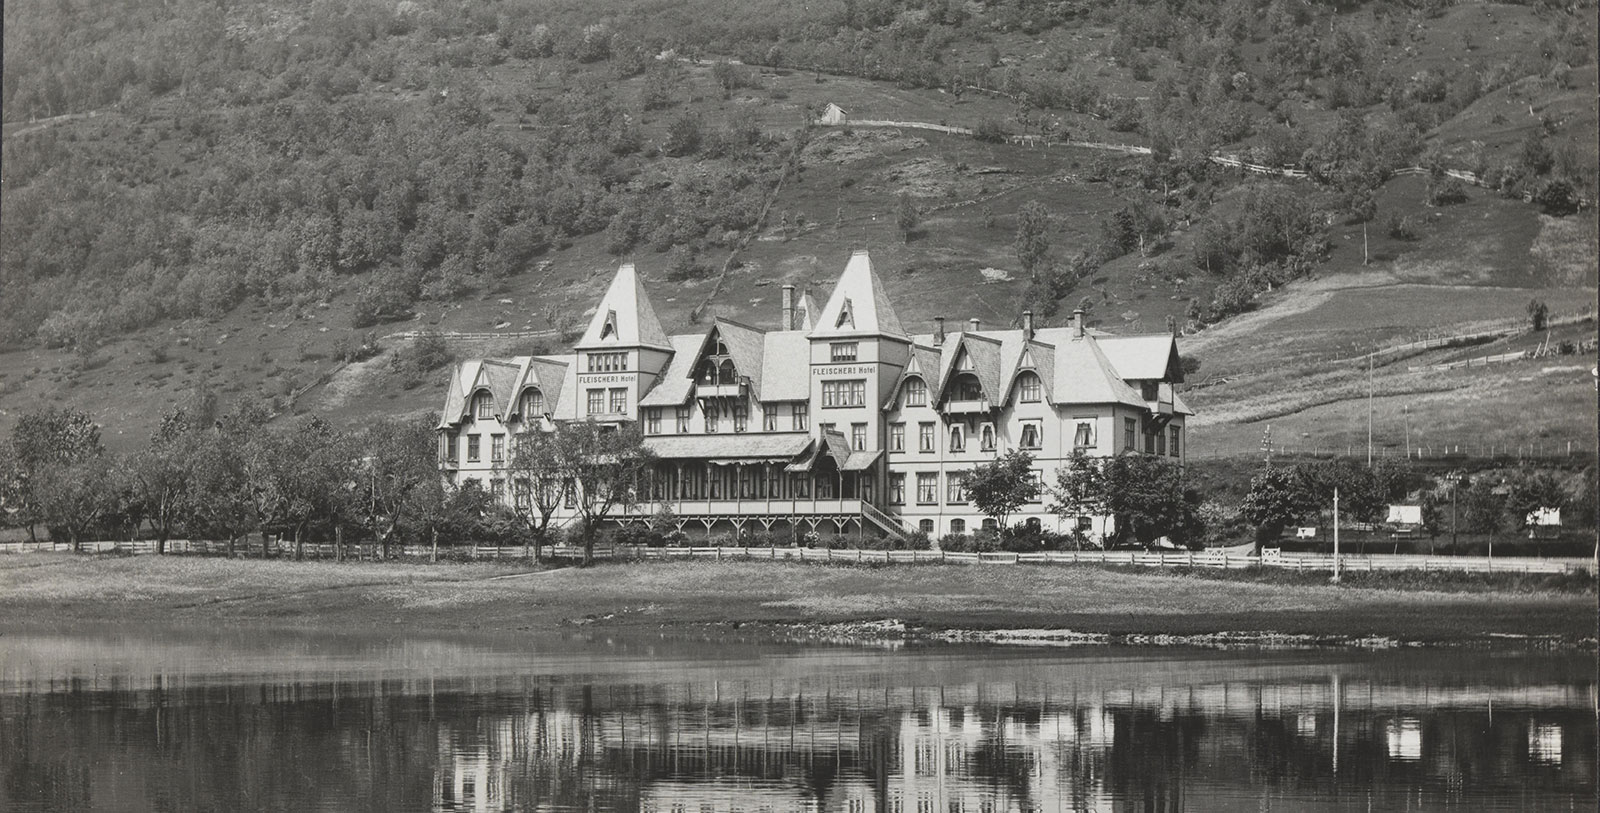 Discover the historic character of the Fleischer’s Hotel.